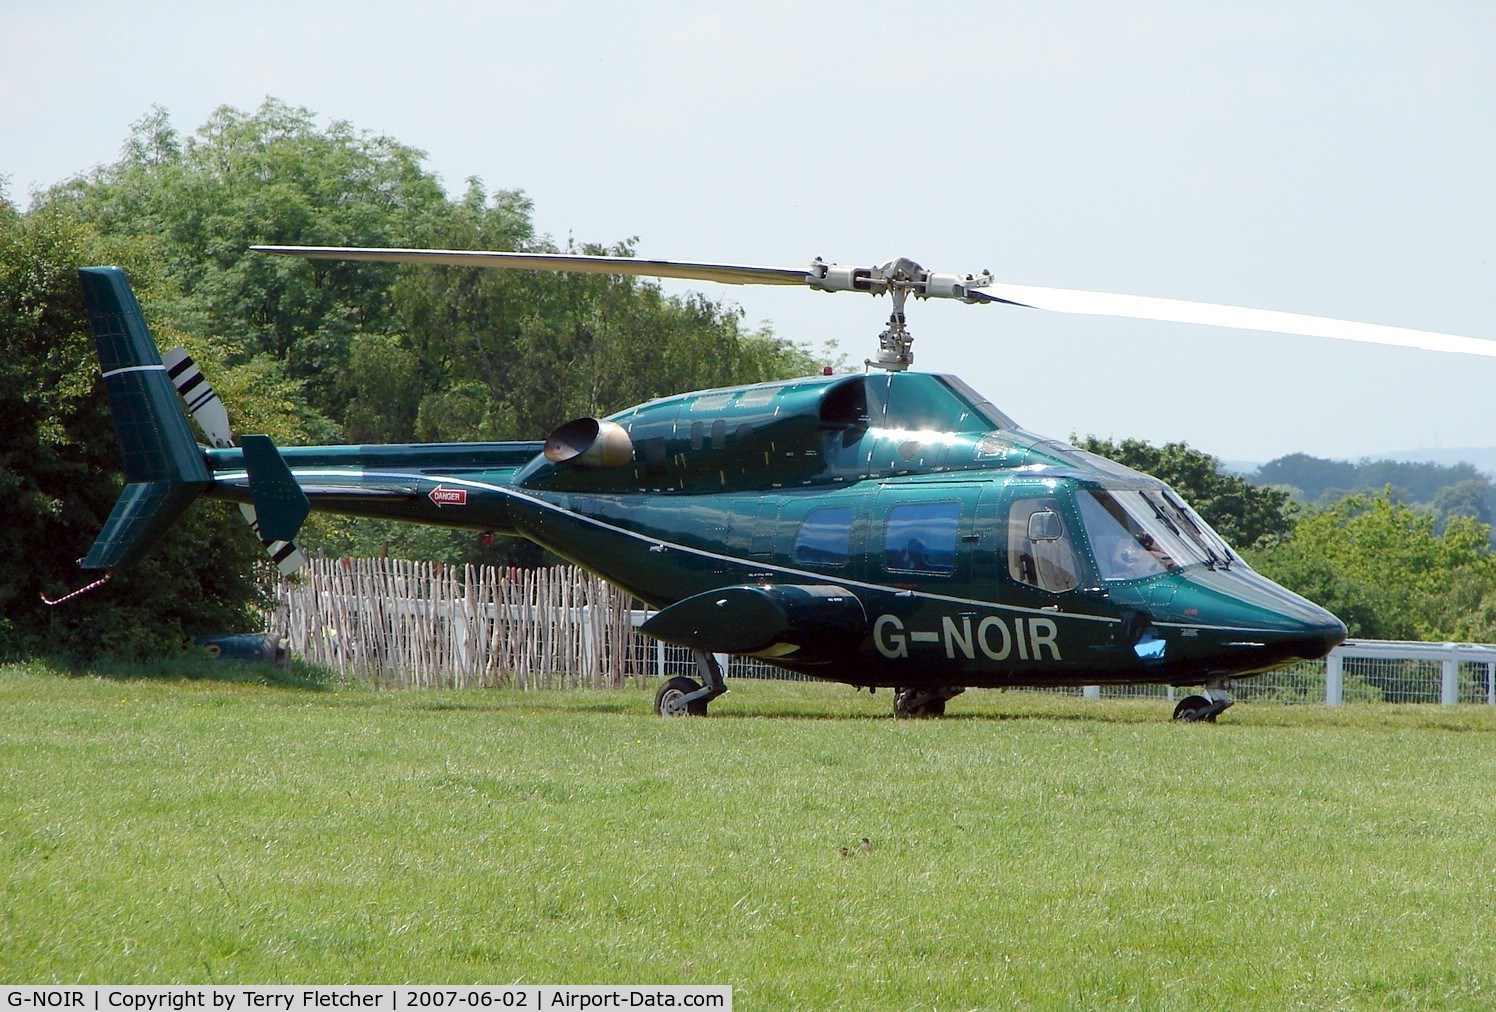 G-NOIR, 1980 Bell 222 C/N 47031, Helicopters arrive at the temporary Heliport on 2007 Epsom Derby Day (Horse racing)